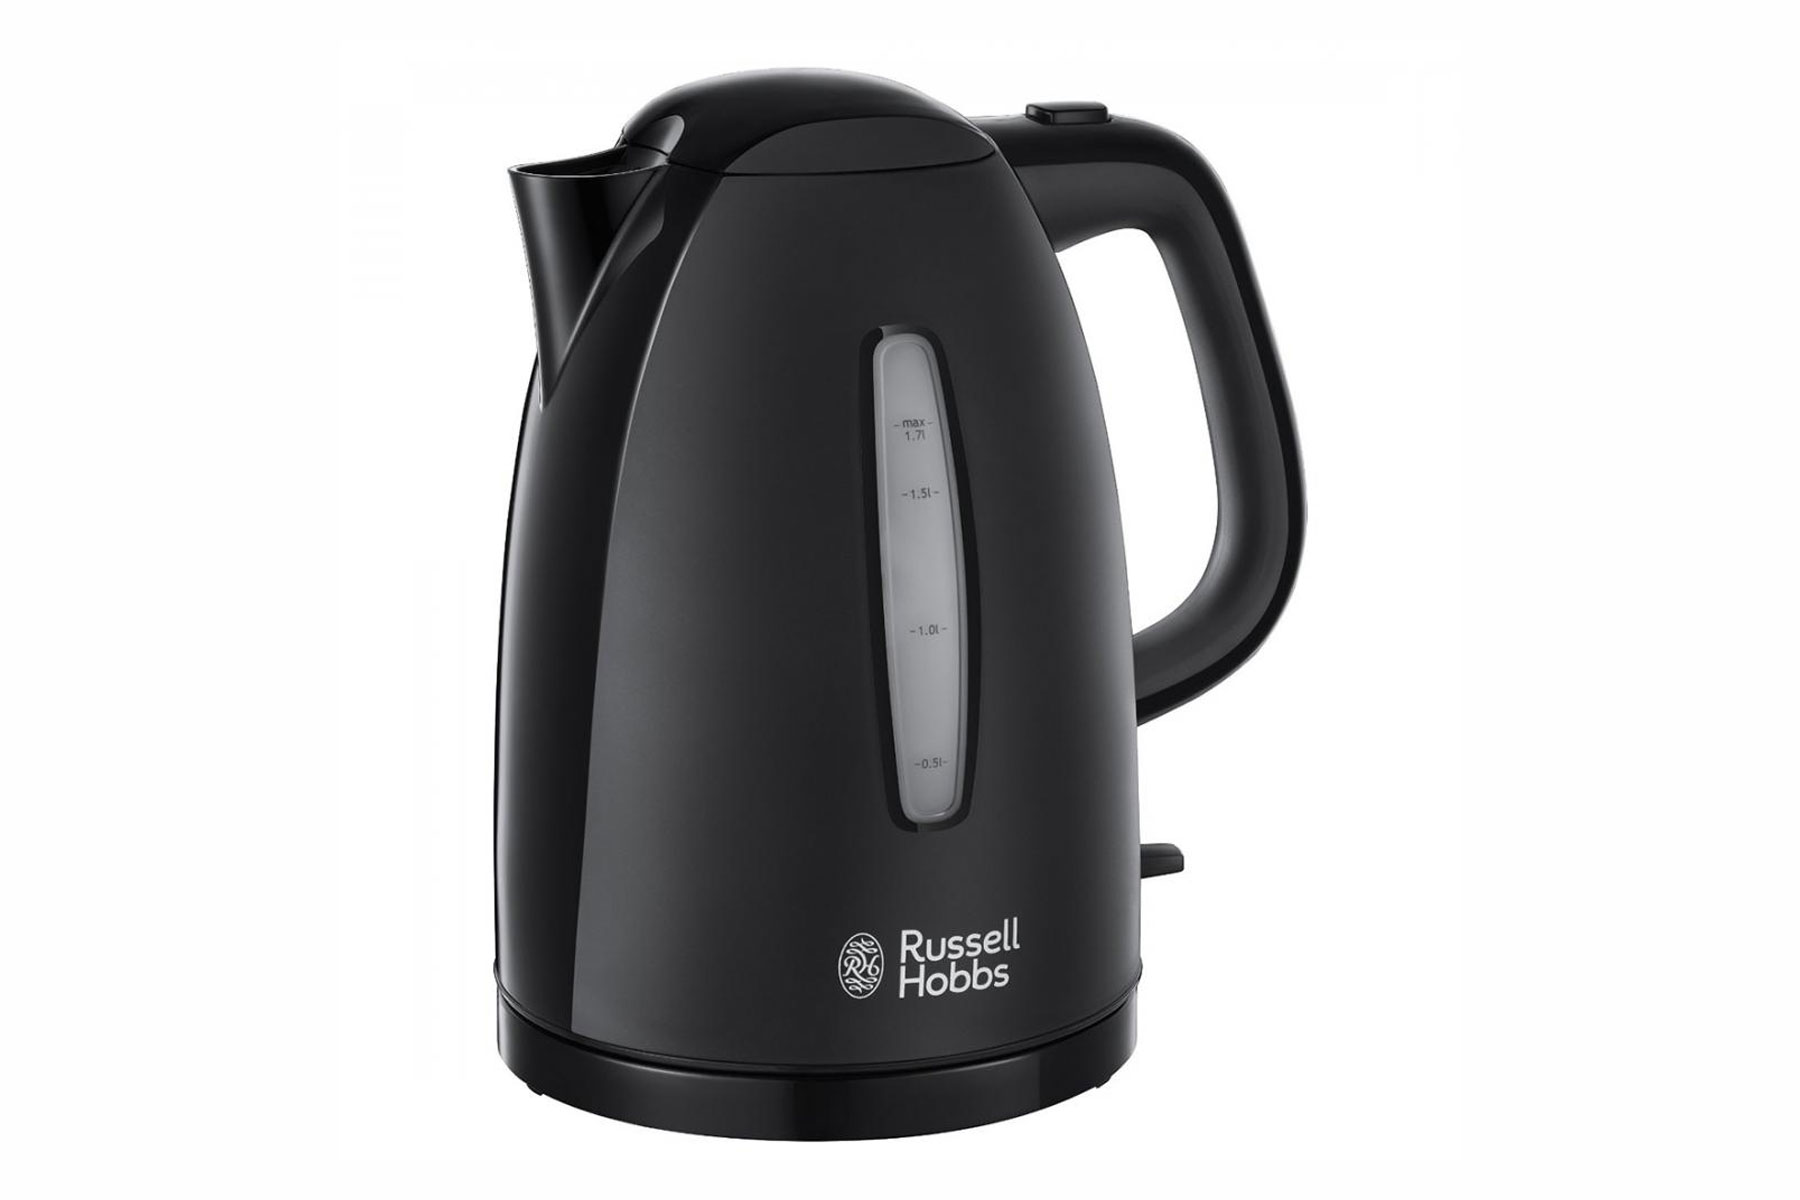 RUSSELL HOBBS KETTLE 1.7L